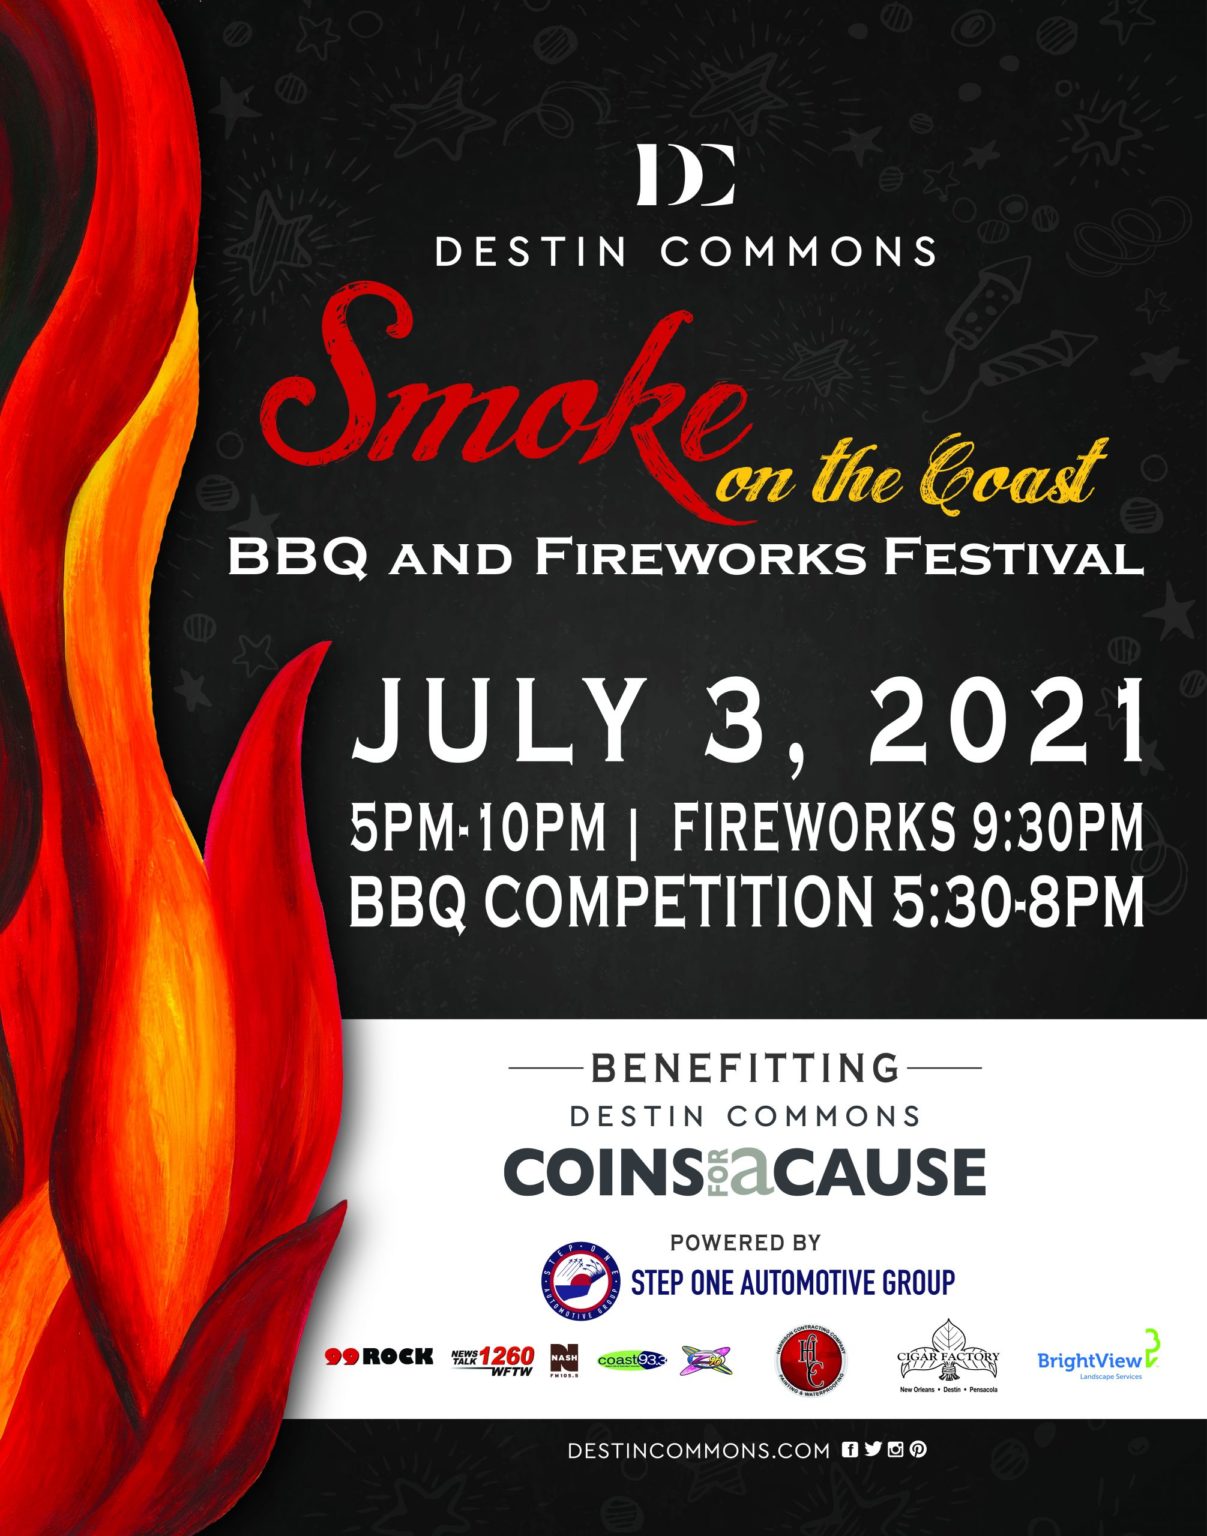 Smoke on the Coast BBQ & Fireworks Festival Destin Commons Get The